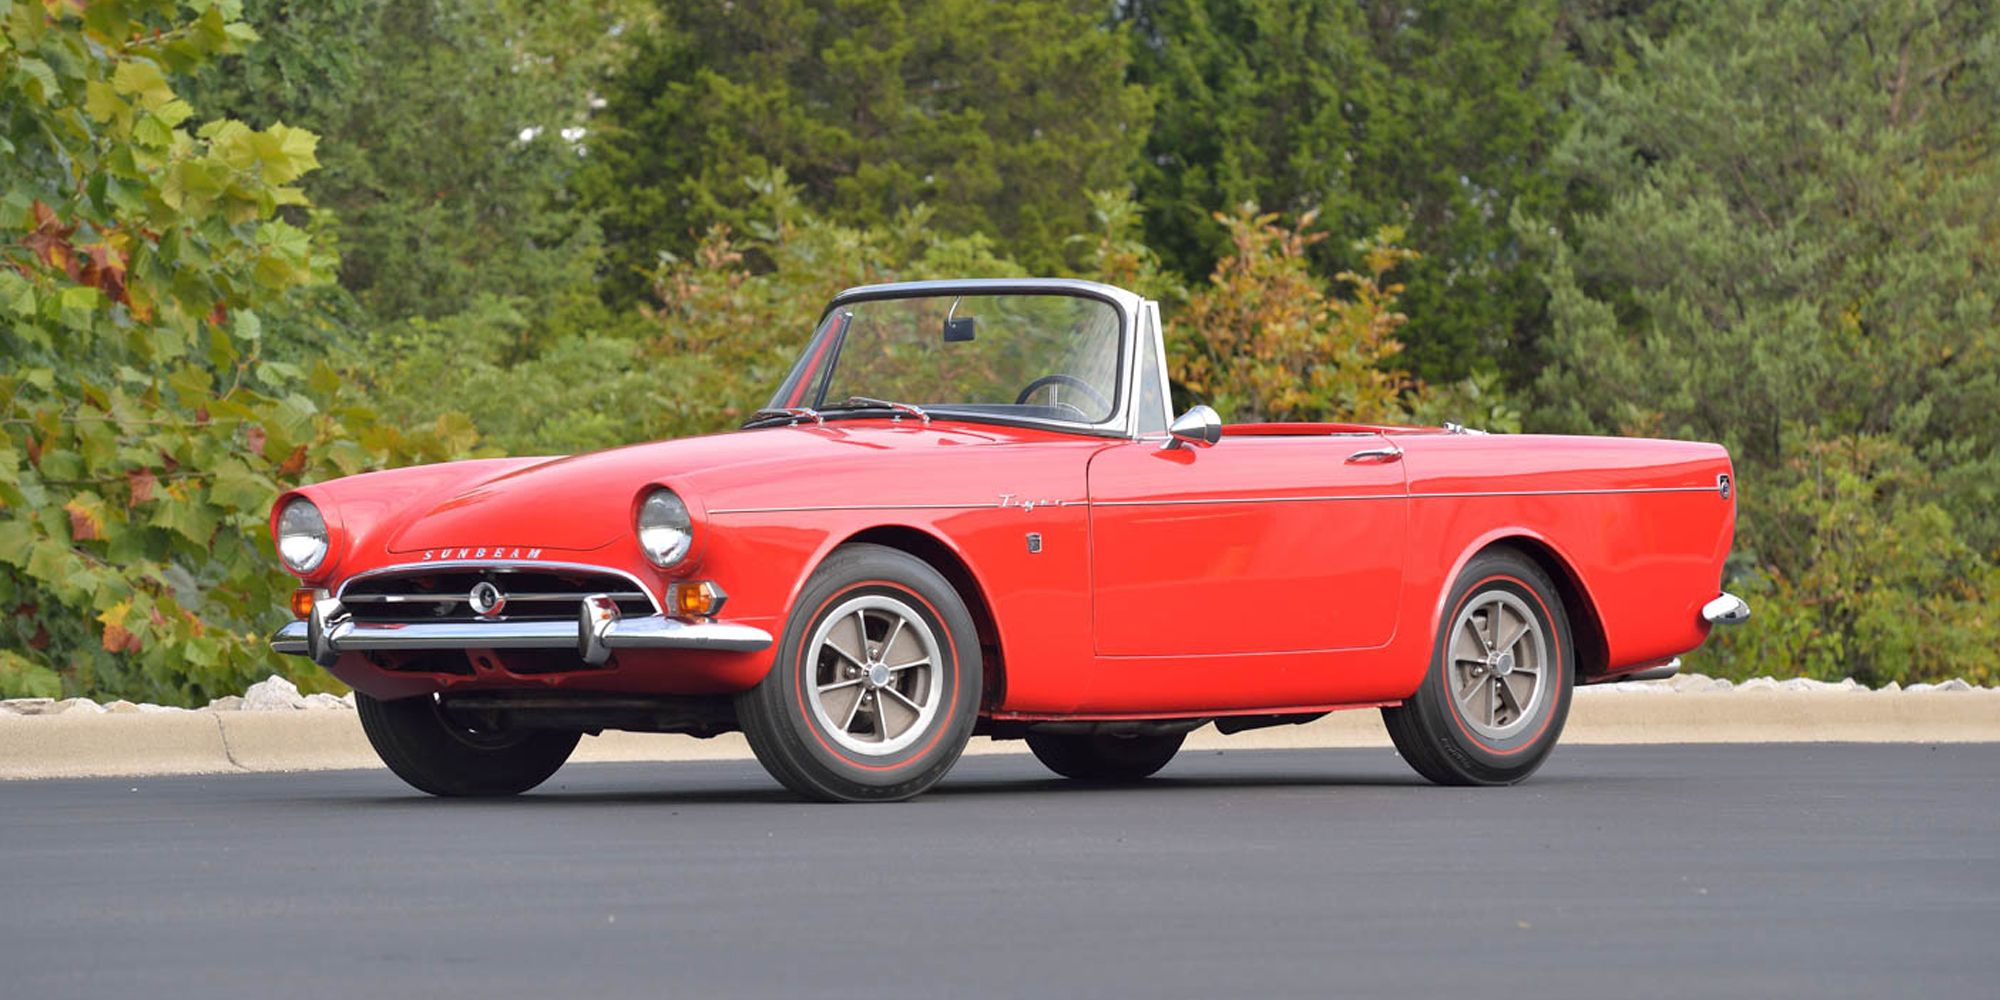 Front 3/4 view of the Sunbeam Tiger